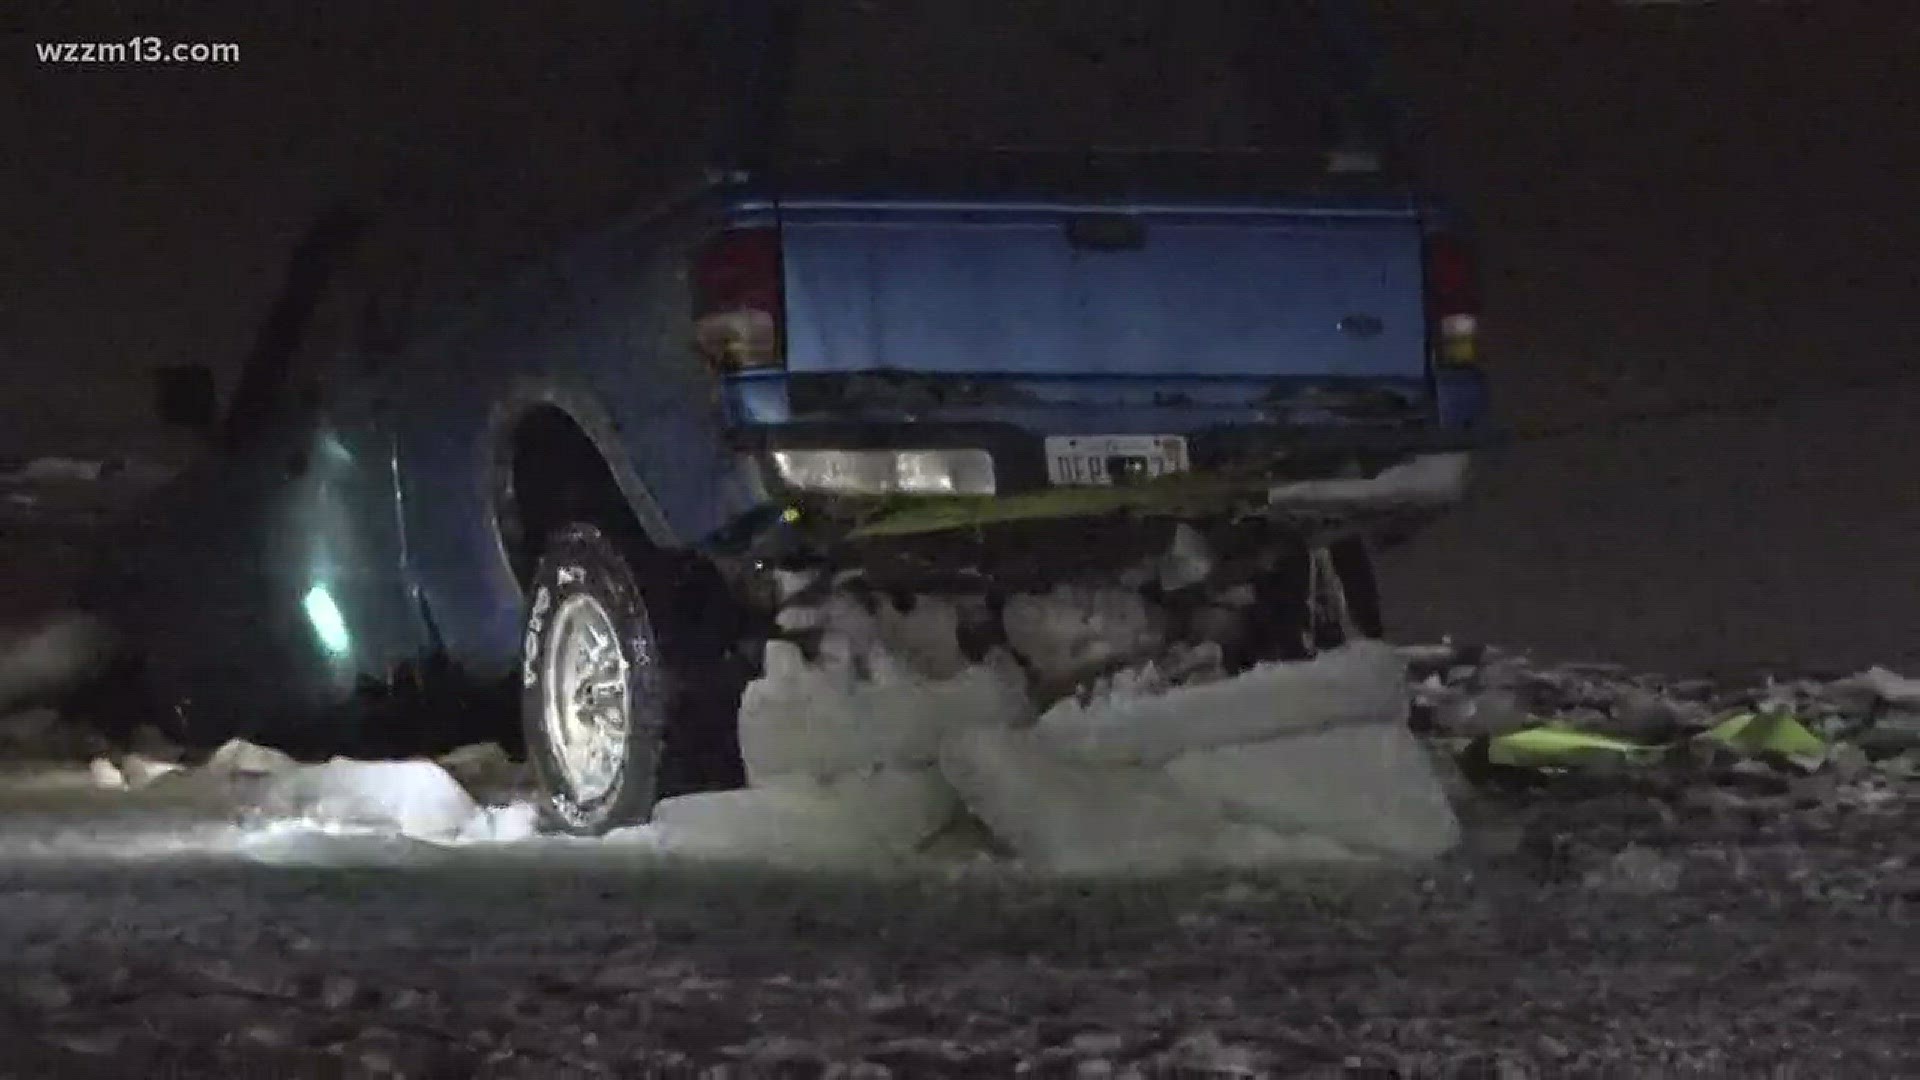 Truck retrieved from the ice